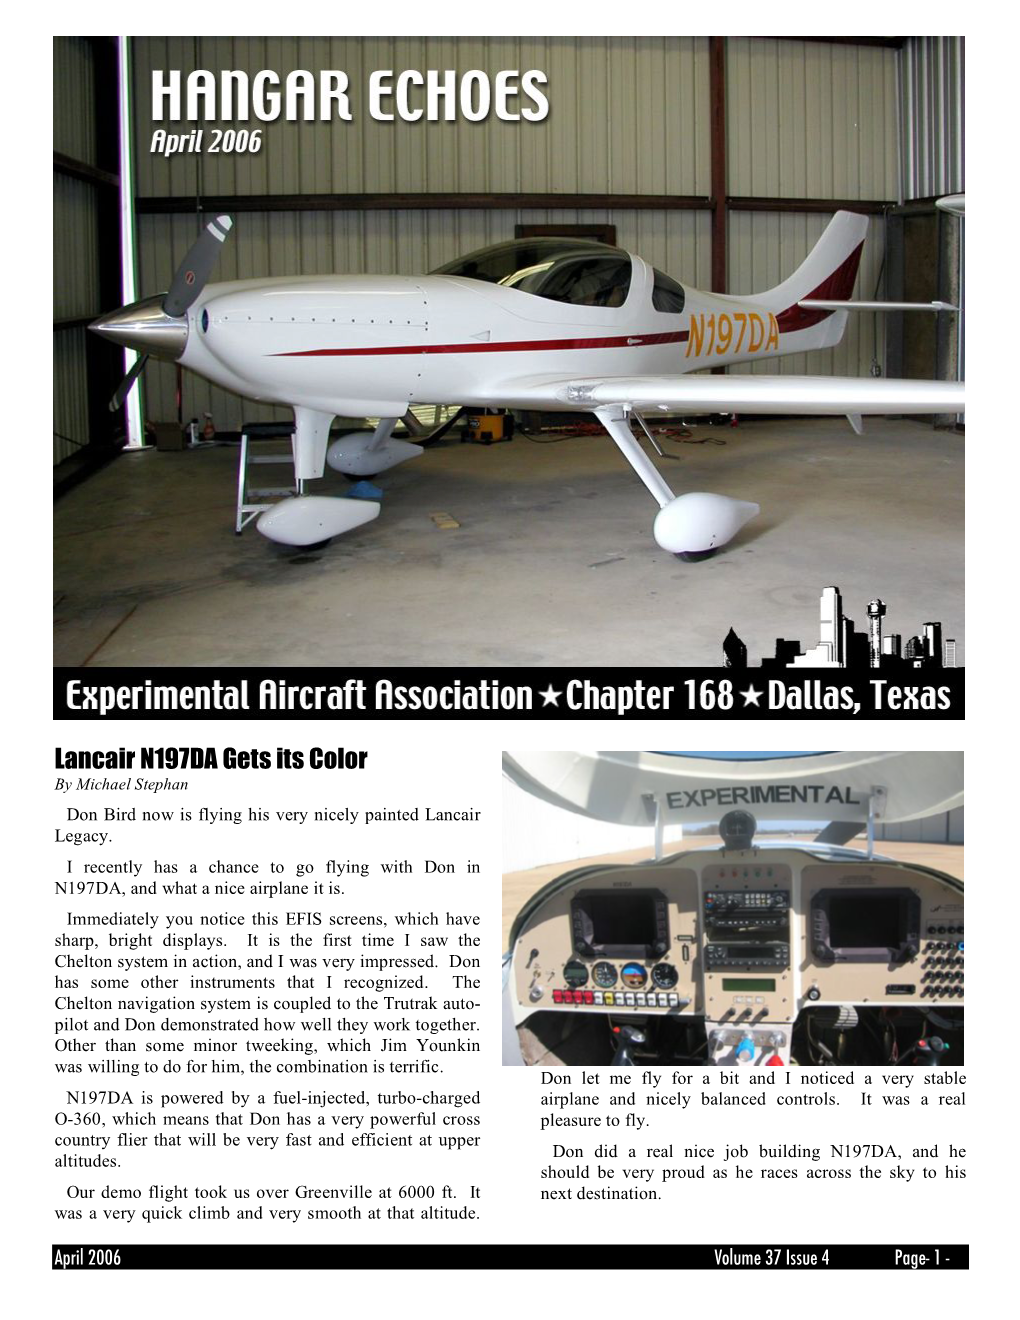 Lancair N197DA Gets Its Color by Michael Stephan Don Bird Now Is Flying His Very Nicely Painted Lancair Legacy